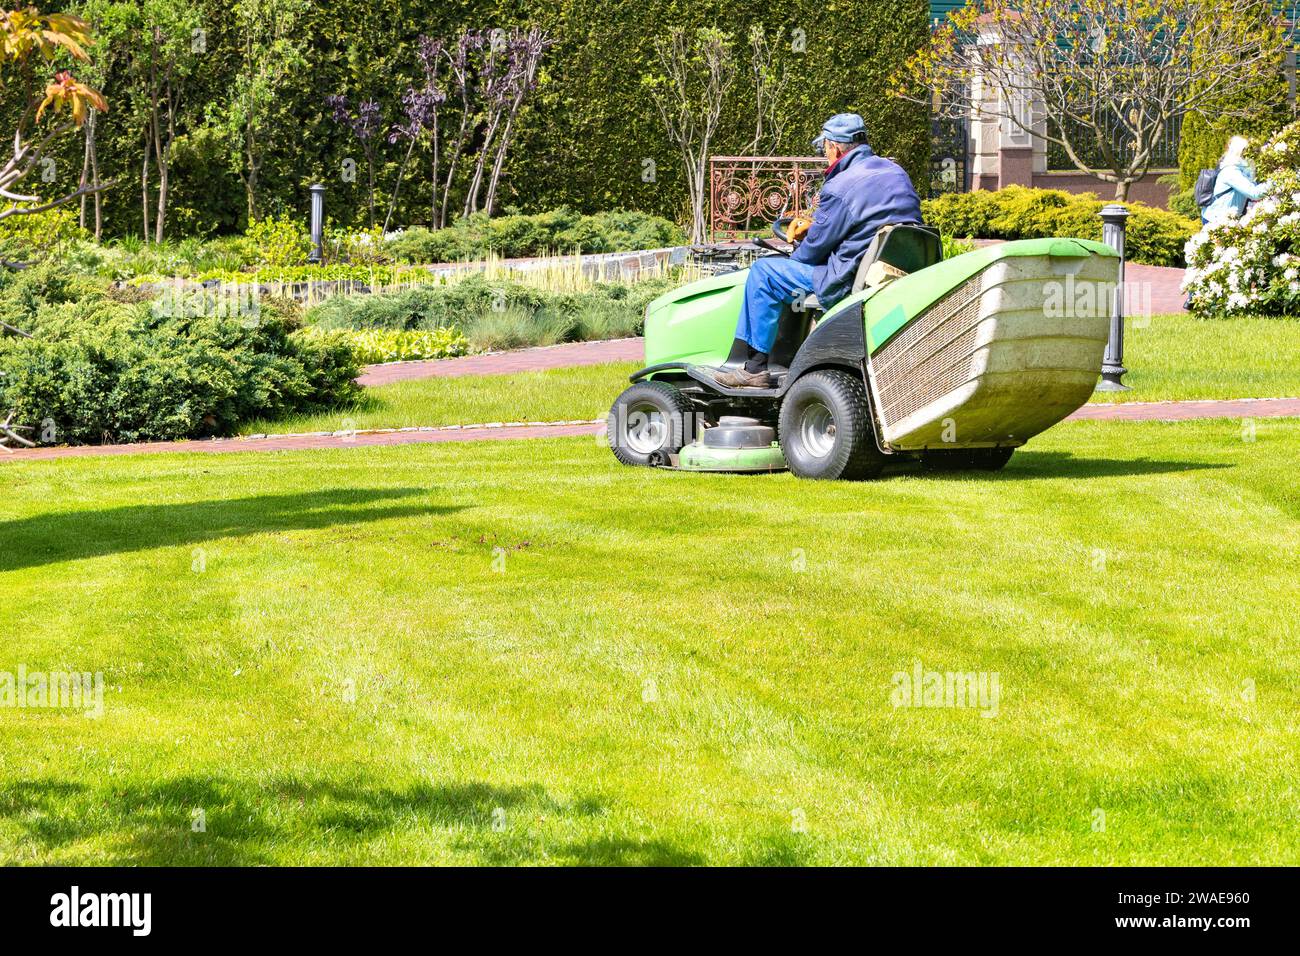 A gardener on an industrial tractor mower takes care of a green lawn on a clear sunny day, copy space. Stock Photo